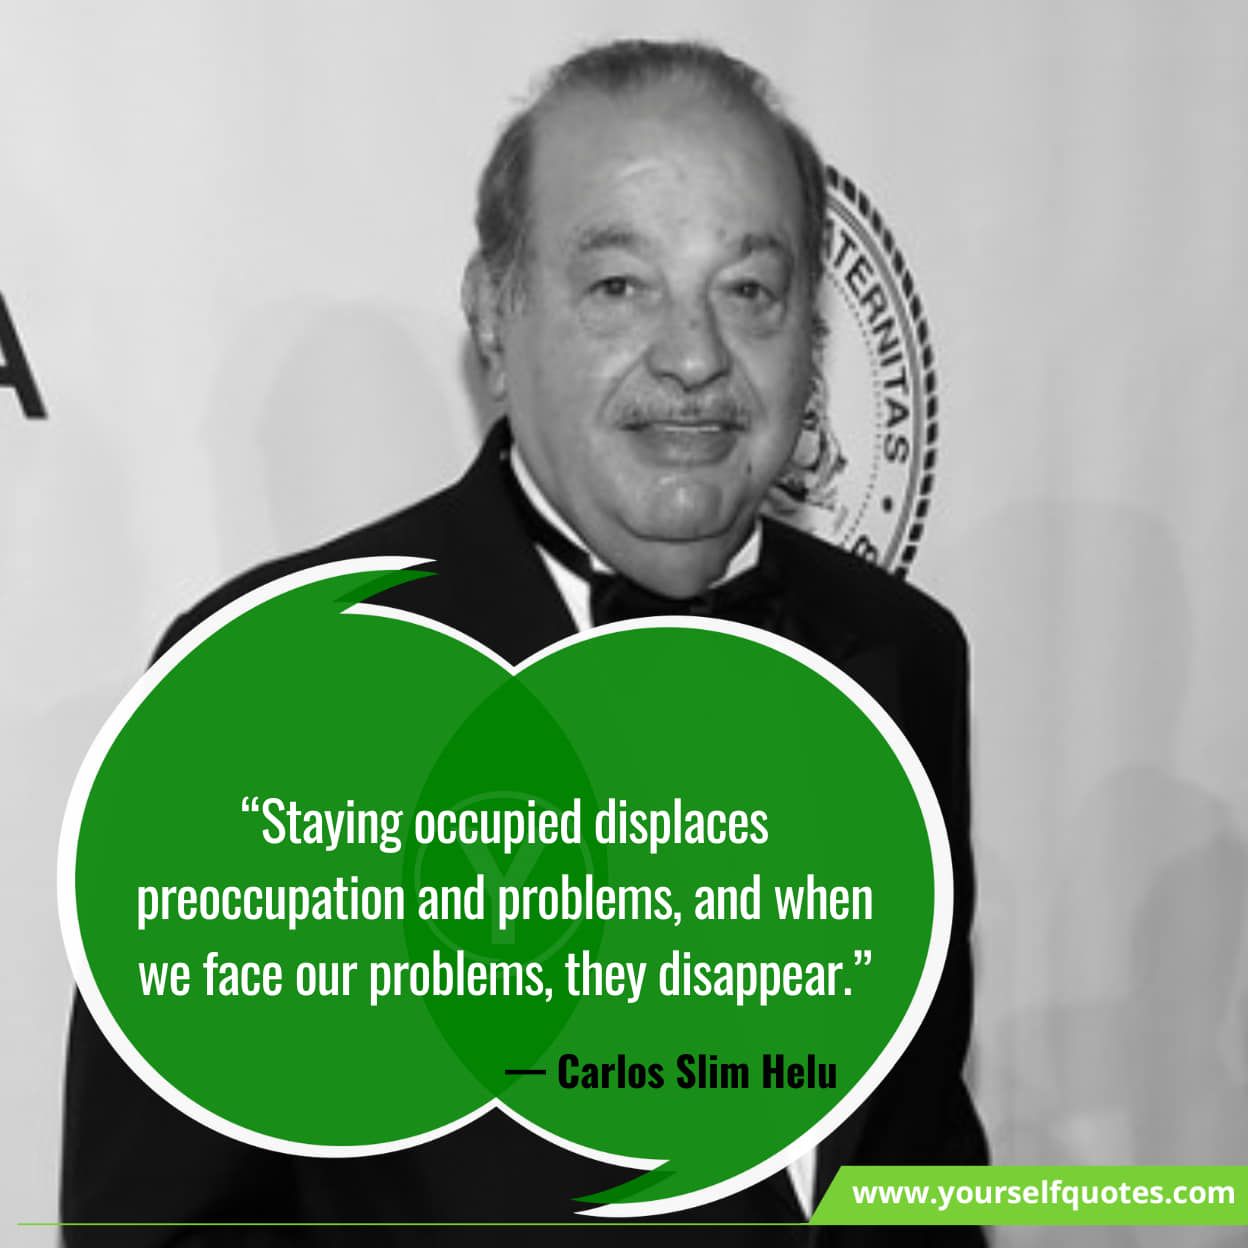 Carlos Slim Helu Quotes For Life To Success